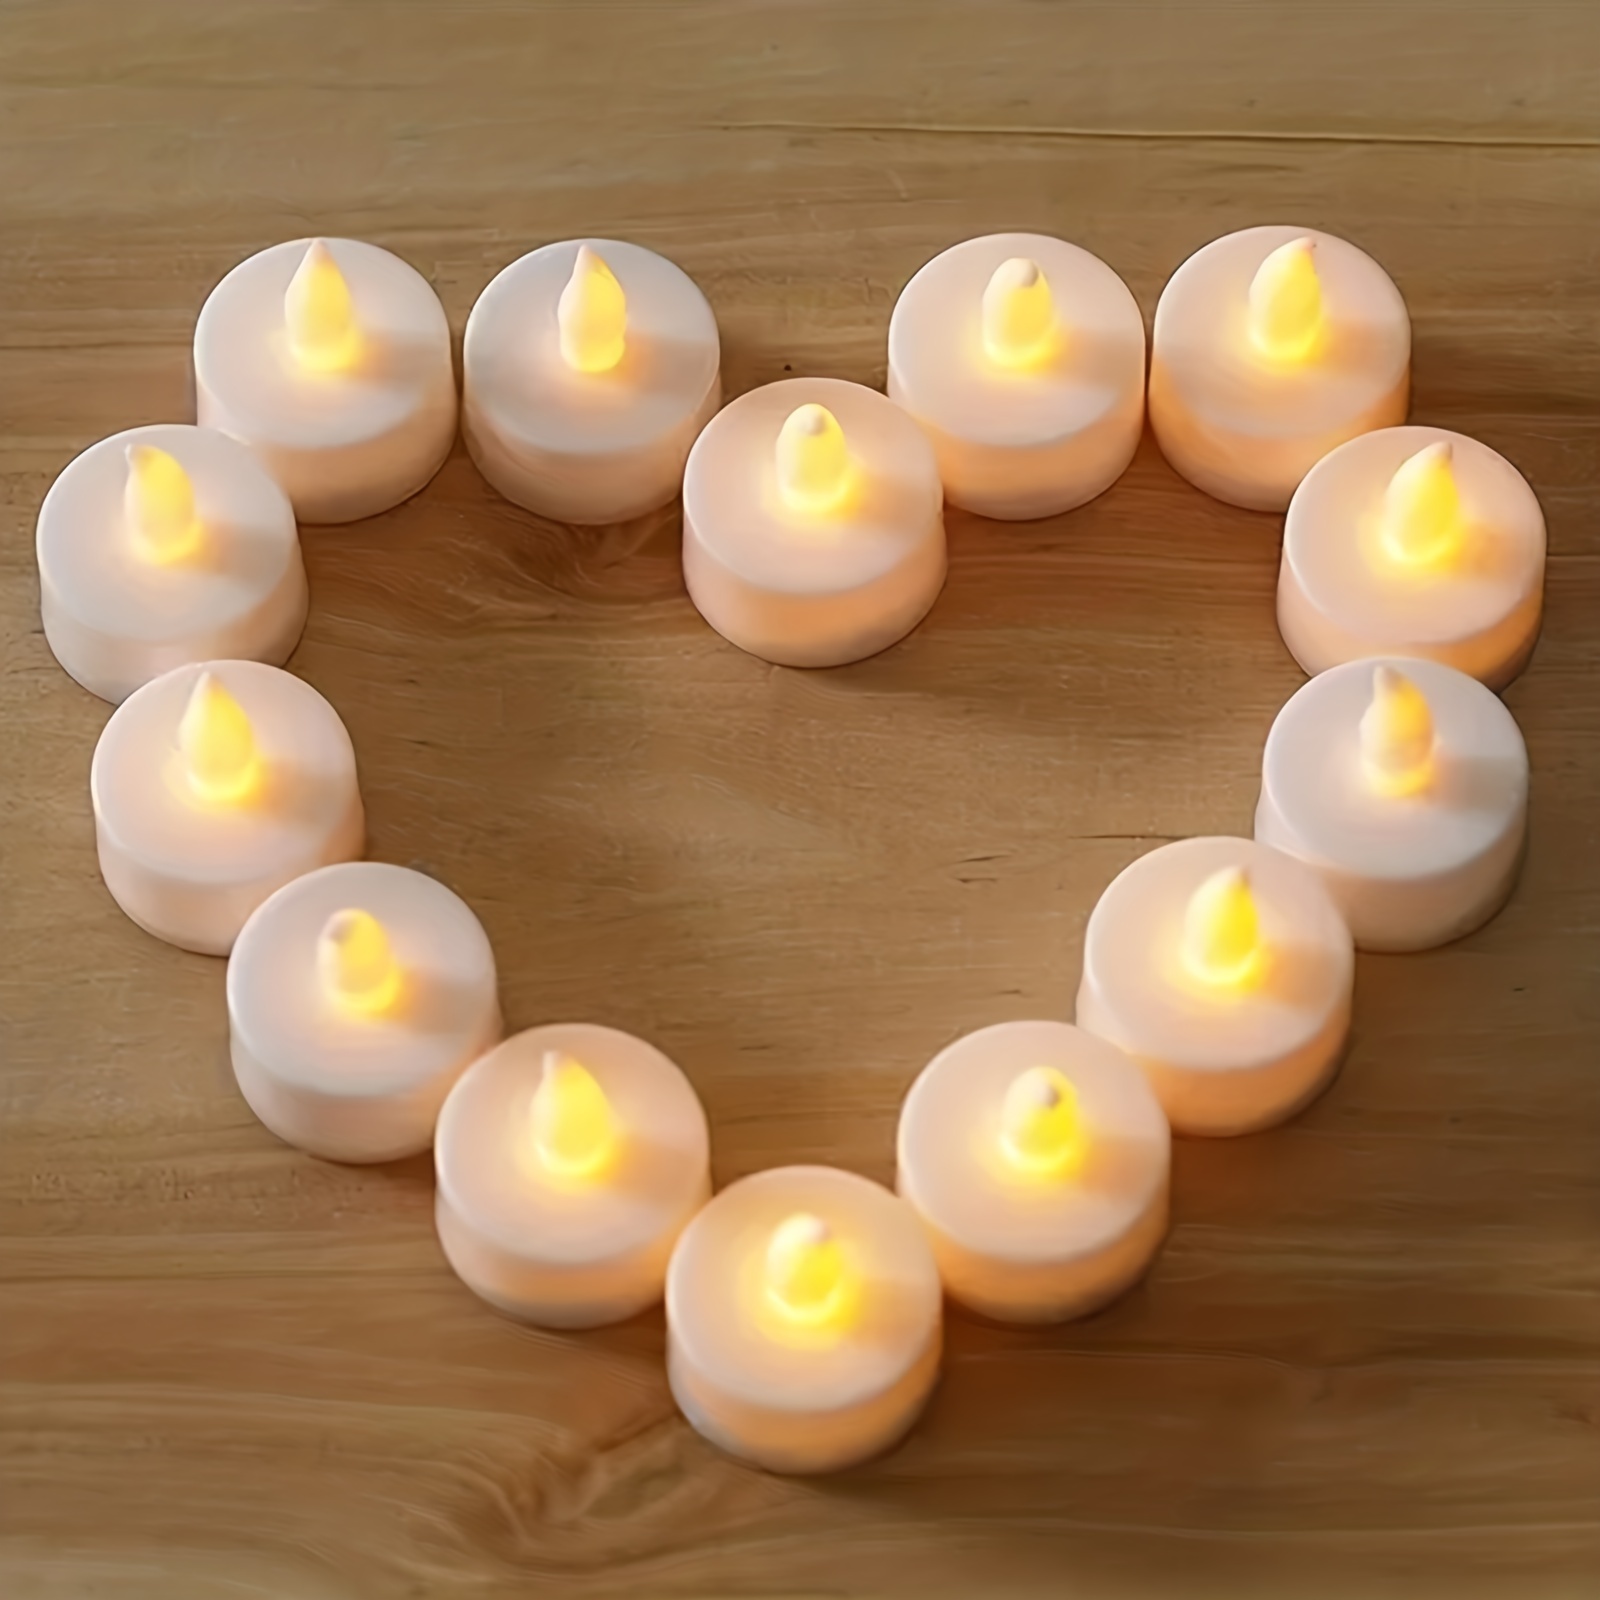 Romantic Heart Shaped LED Tea Lights Set Of 24 For Valentines Day